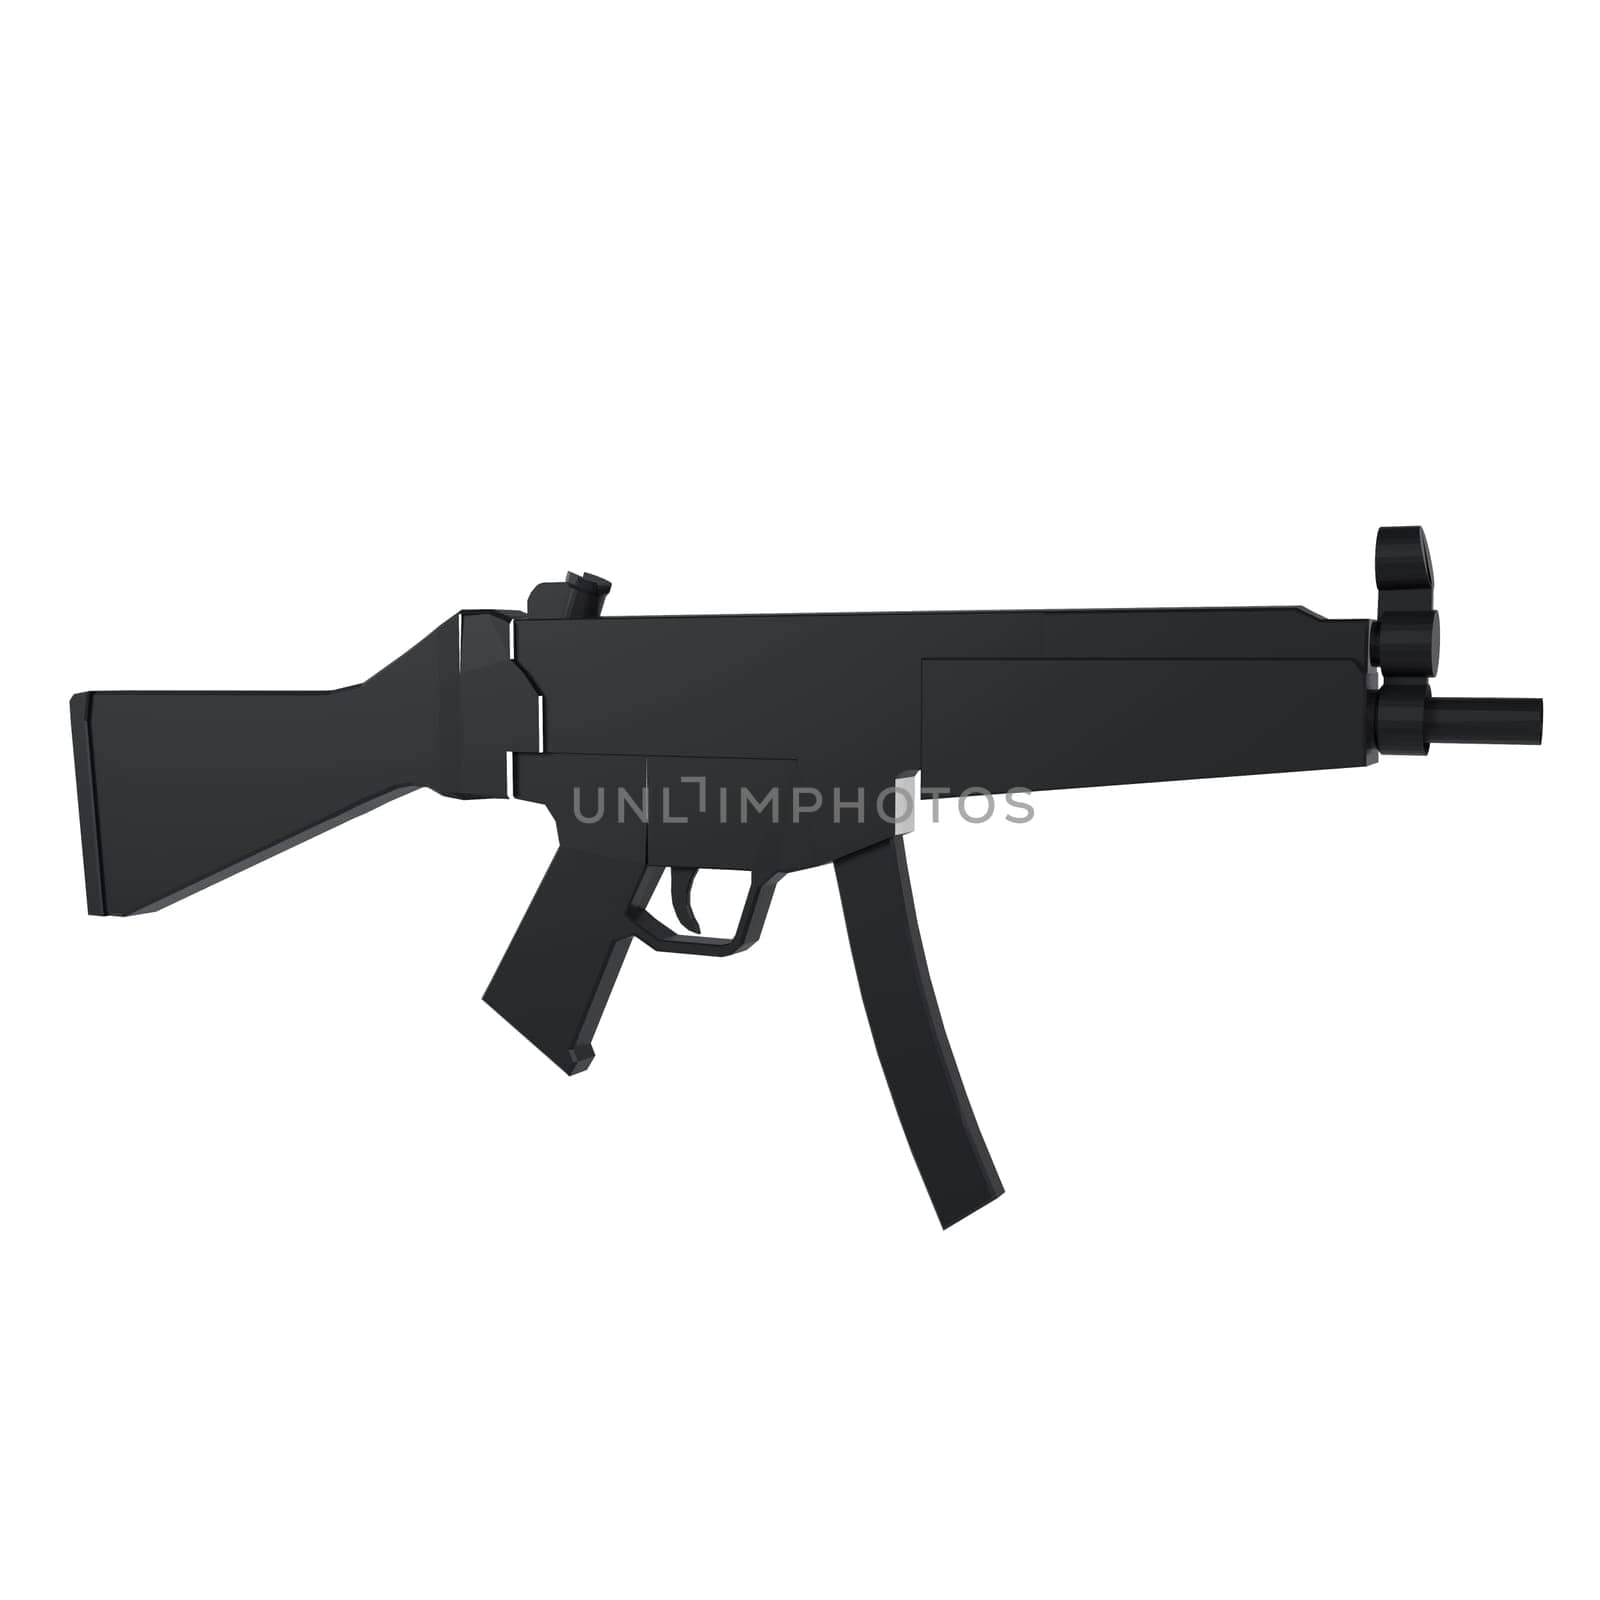 MP5 isolated on white background. High quality 3d illustration